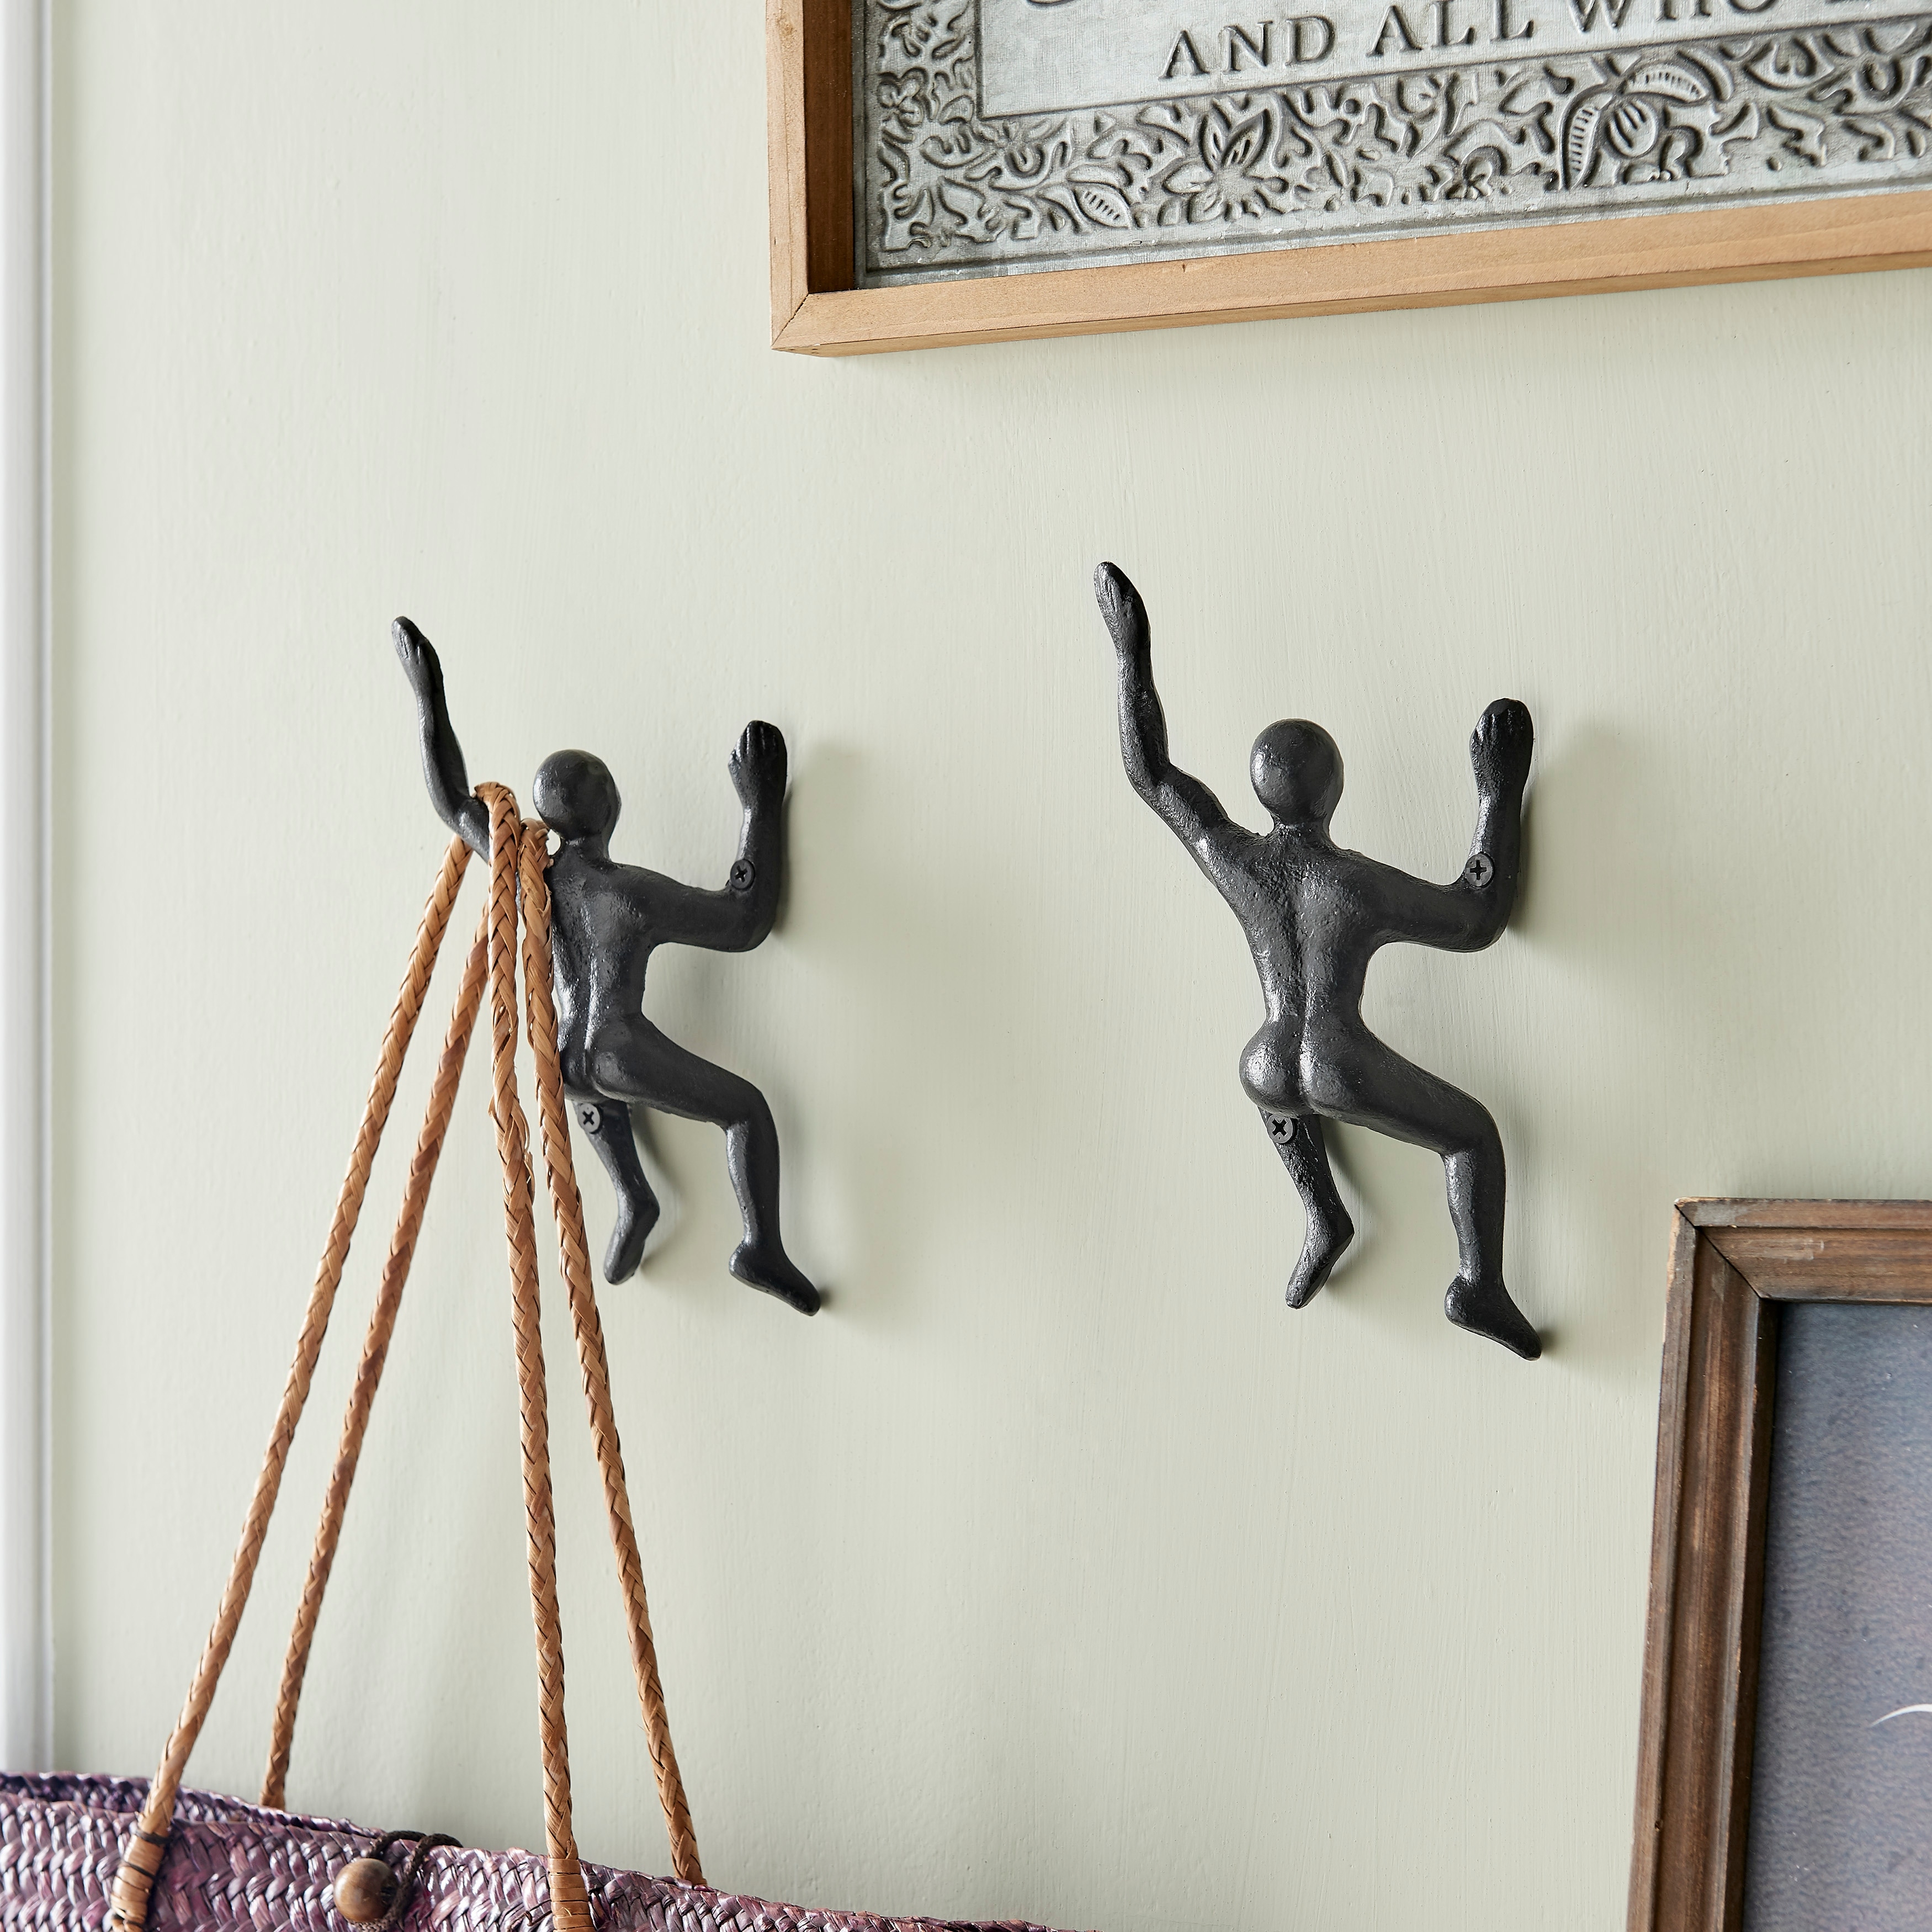 https://ak1.ostkcdn.com/images/products/is/images/direct/a59b2bf2e307d36be0e23cfaa5ae637344b87e4a/%22Wall-Climber%22-Cast-Iron-Decorative-Wall-Mount-Hook-%28Set-of-2%29---Black.jpg